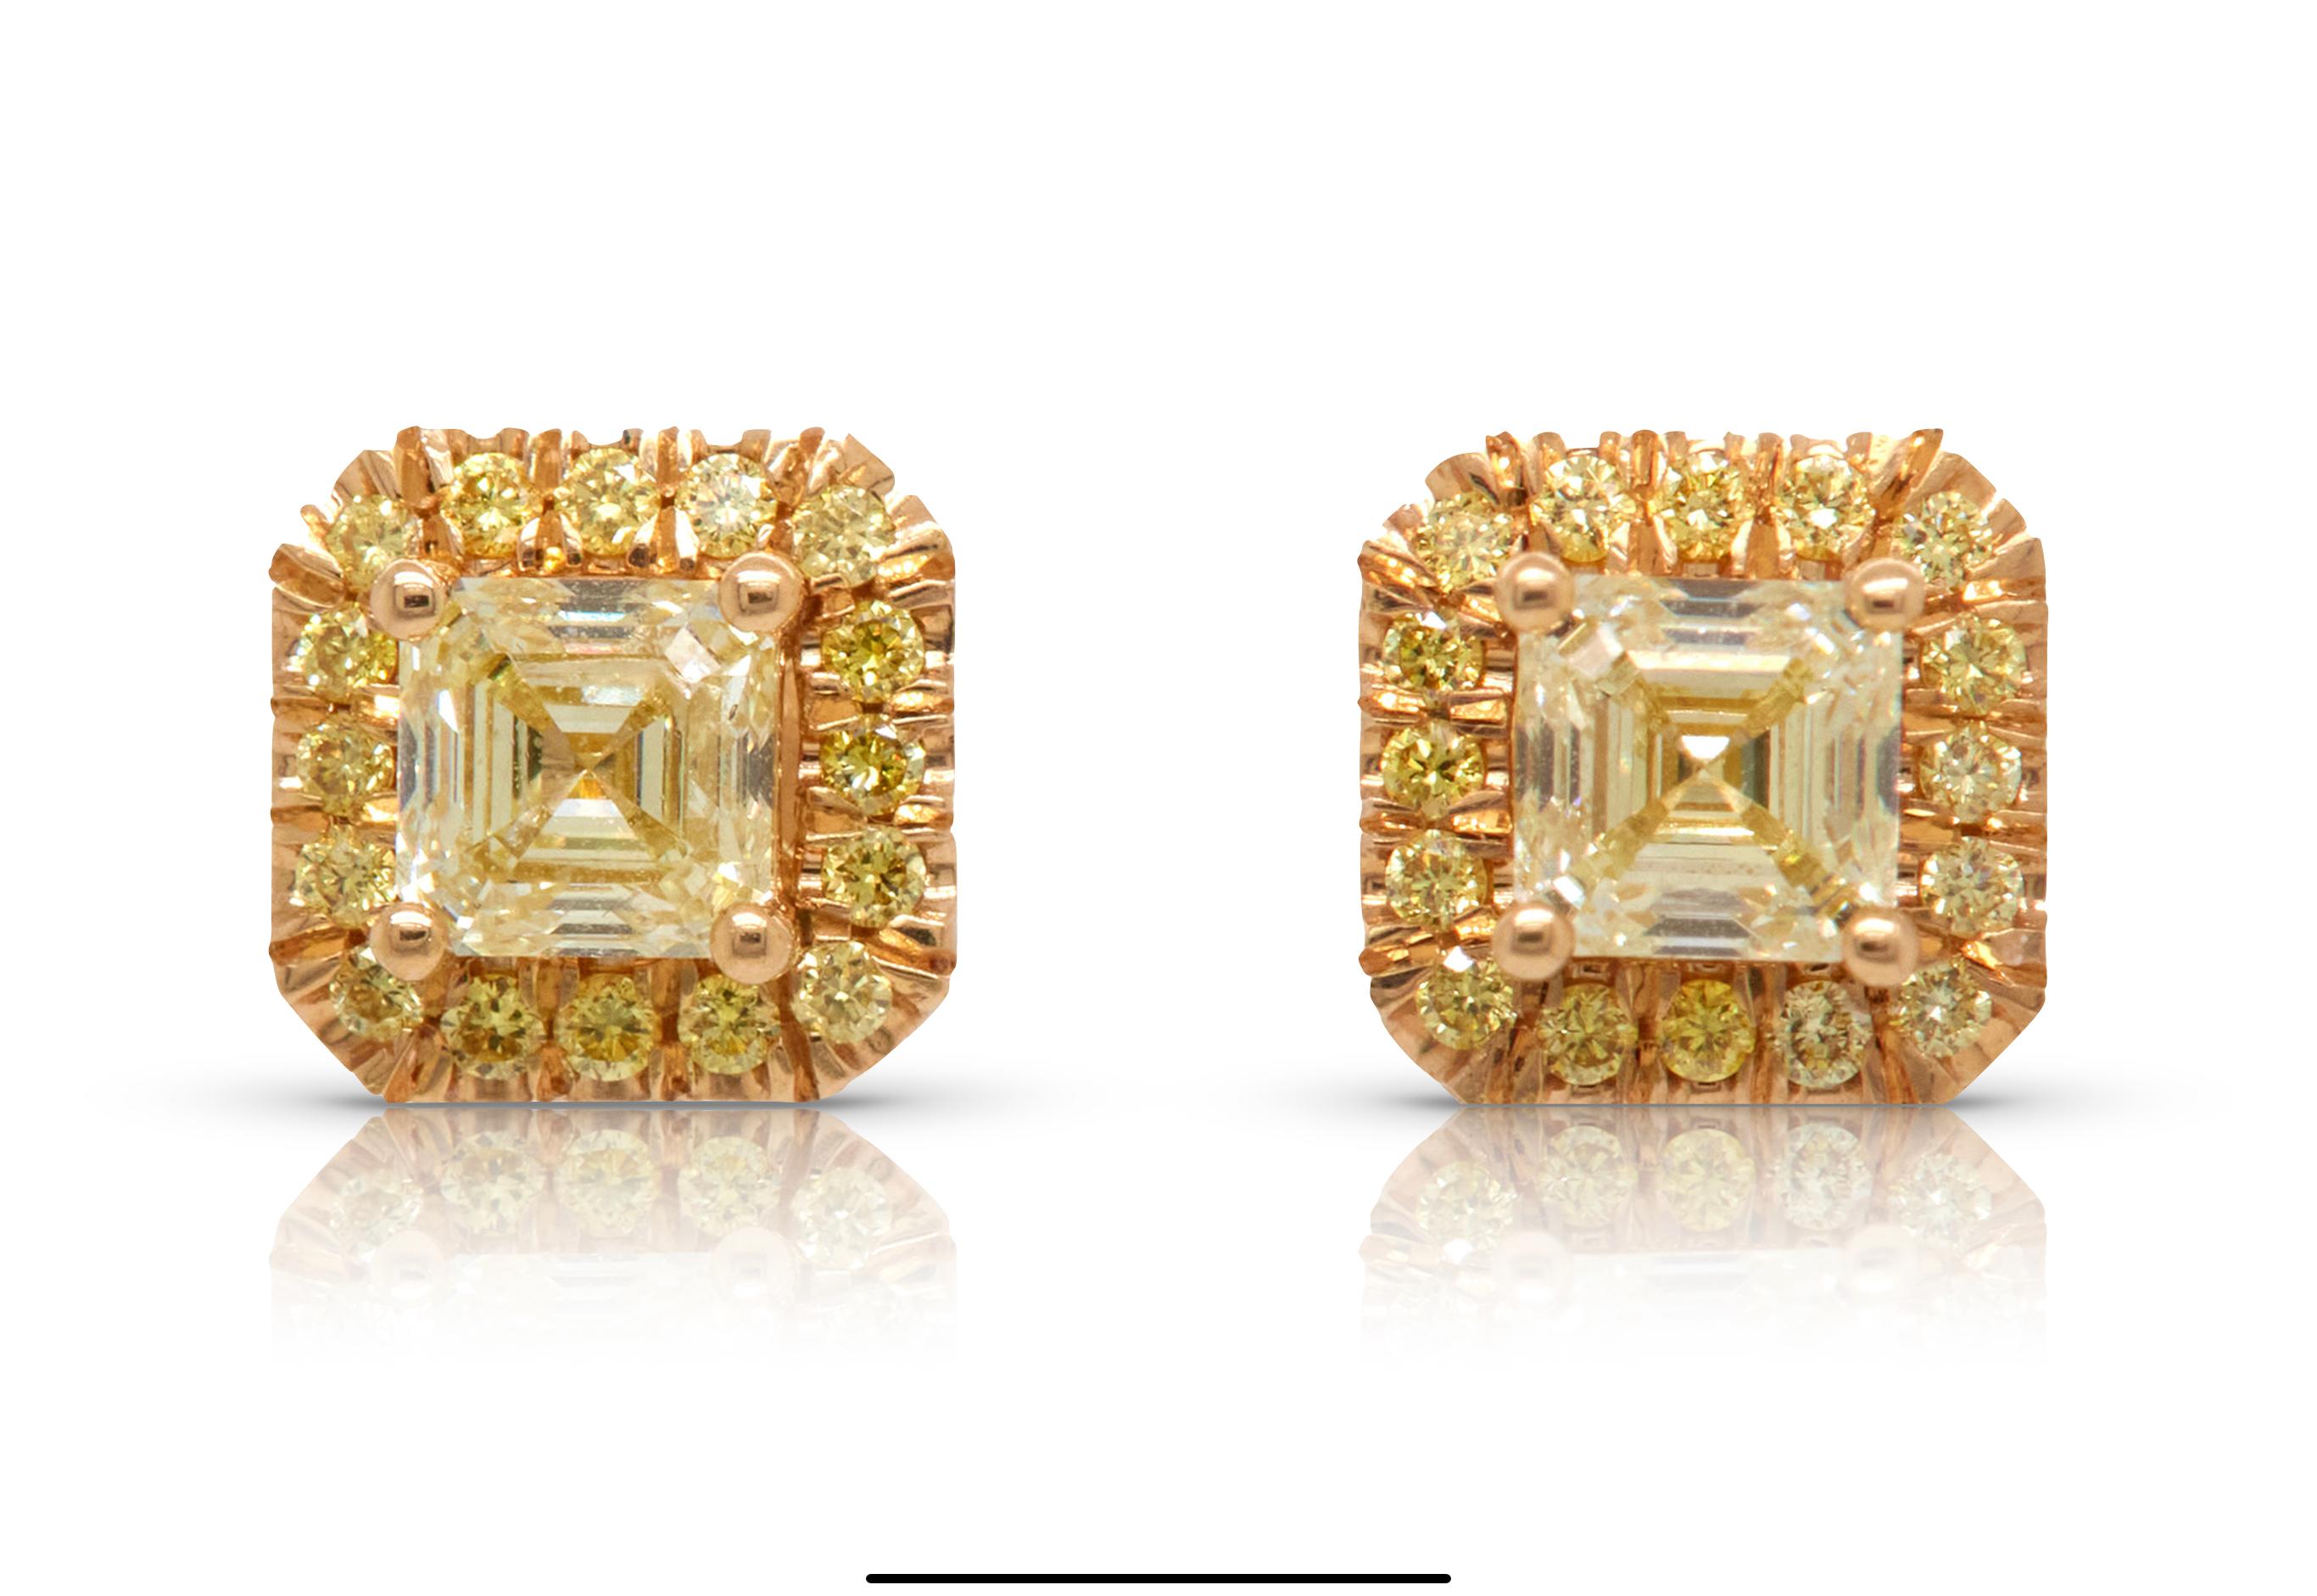 1.45 carat Fancy Intense Yellow Diamond Stud Earrings. These beautiful earrings feature a pair of perfectly matched Asscher cut, 1.21 carat fancy yellow diamonds in a glamorous fancy yellow diamond halo.
Set in a polished 18K Yellow Gold.

This